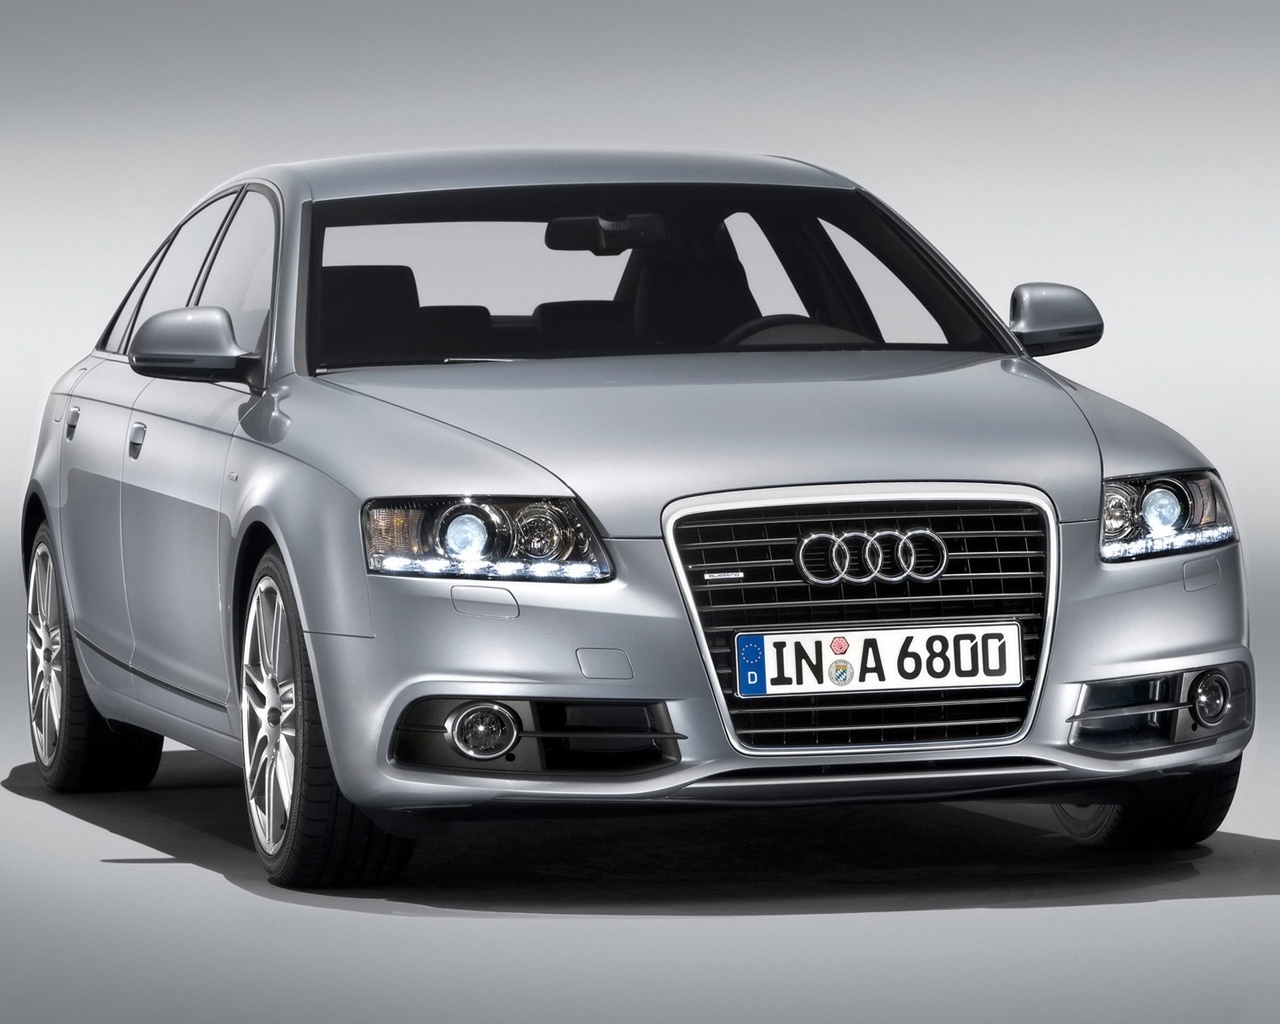 2009 Audi A6 - Rear And Side for 1280 x 1024 resolution